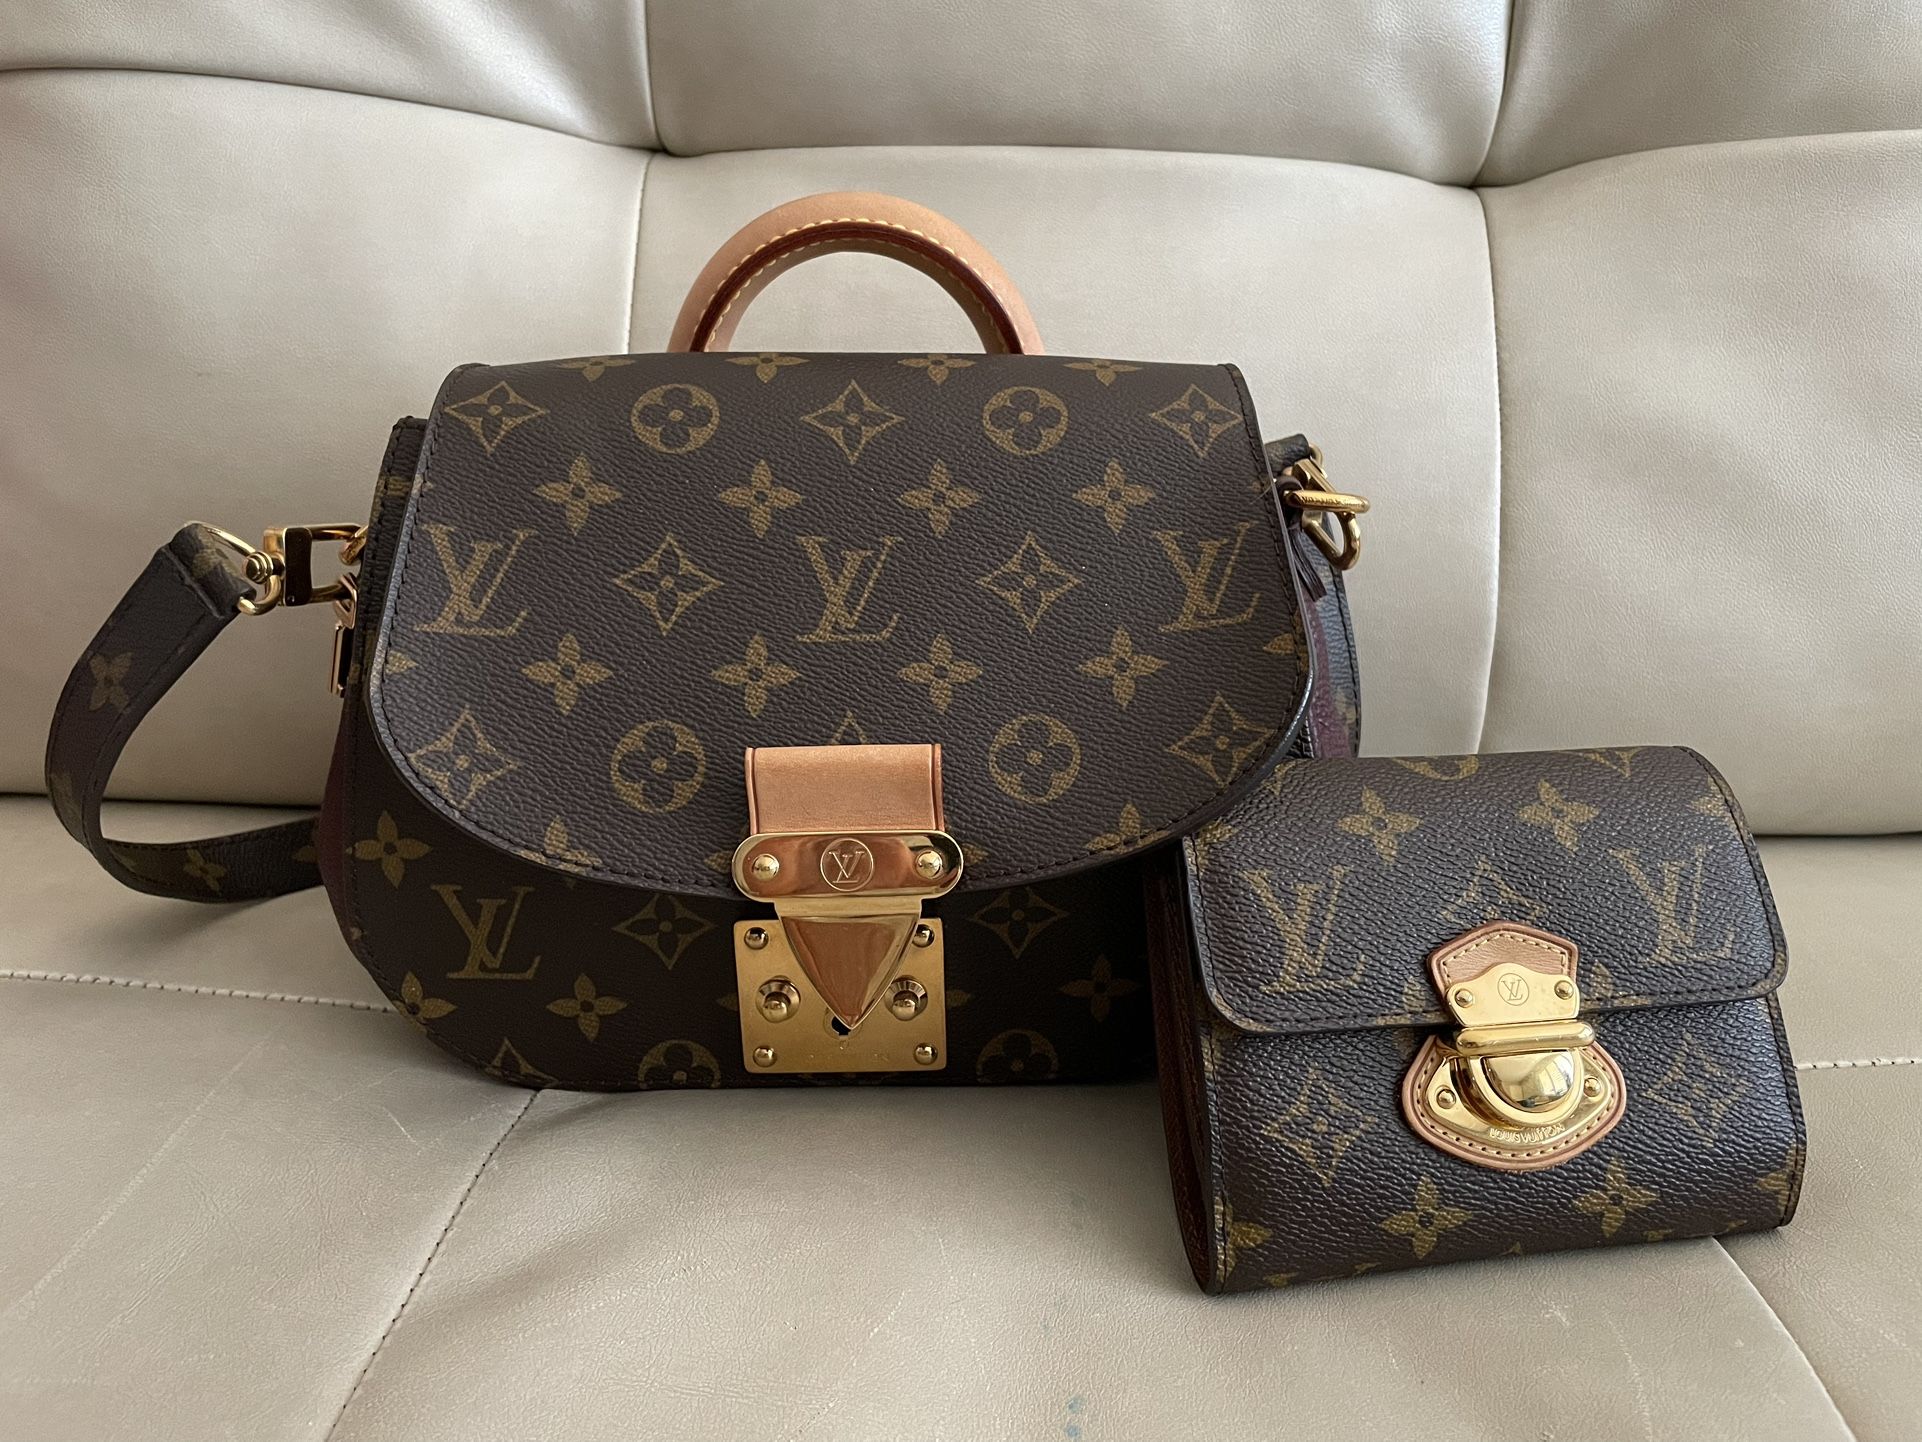 Brand New And Vintage (2011 & 2012)Louis Vuitton Bag Trifold Joey Wallet 